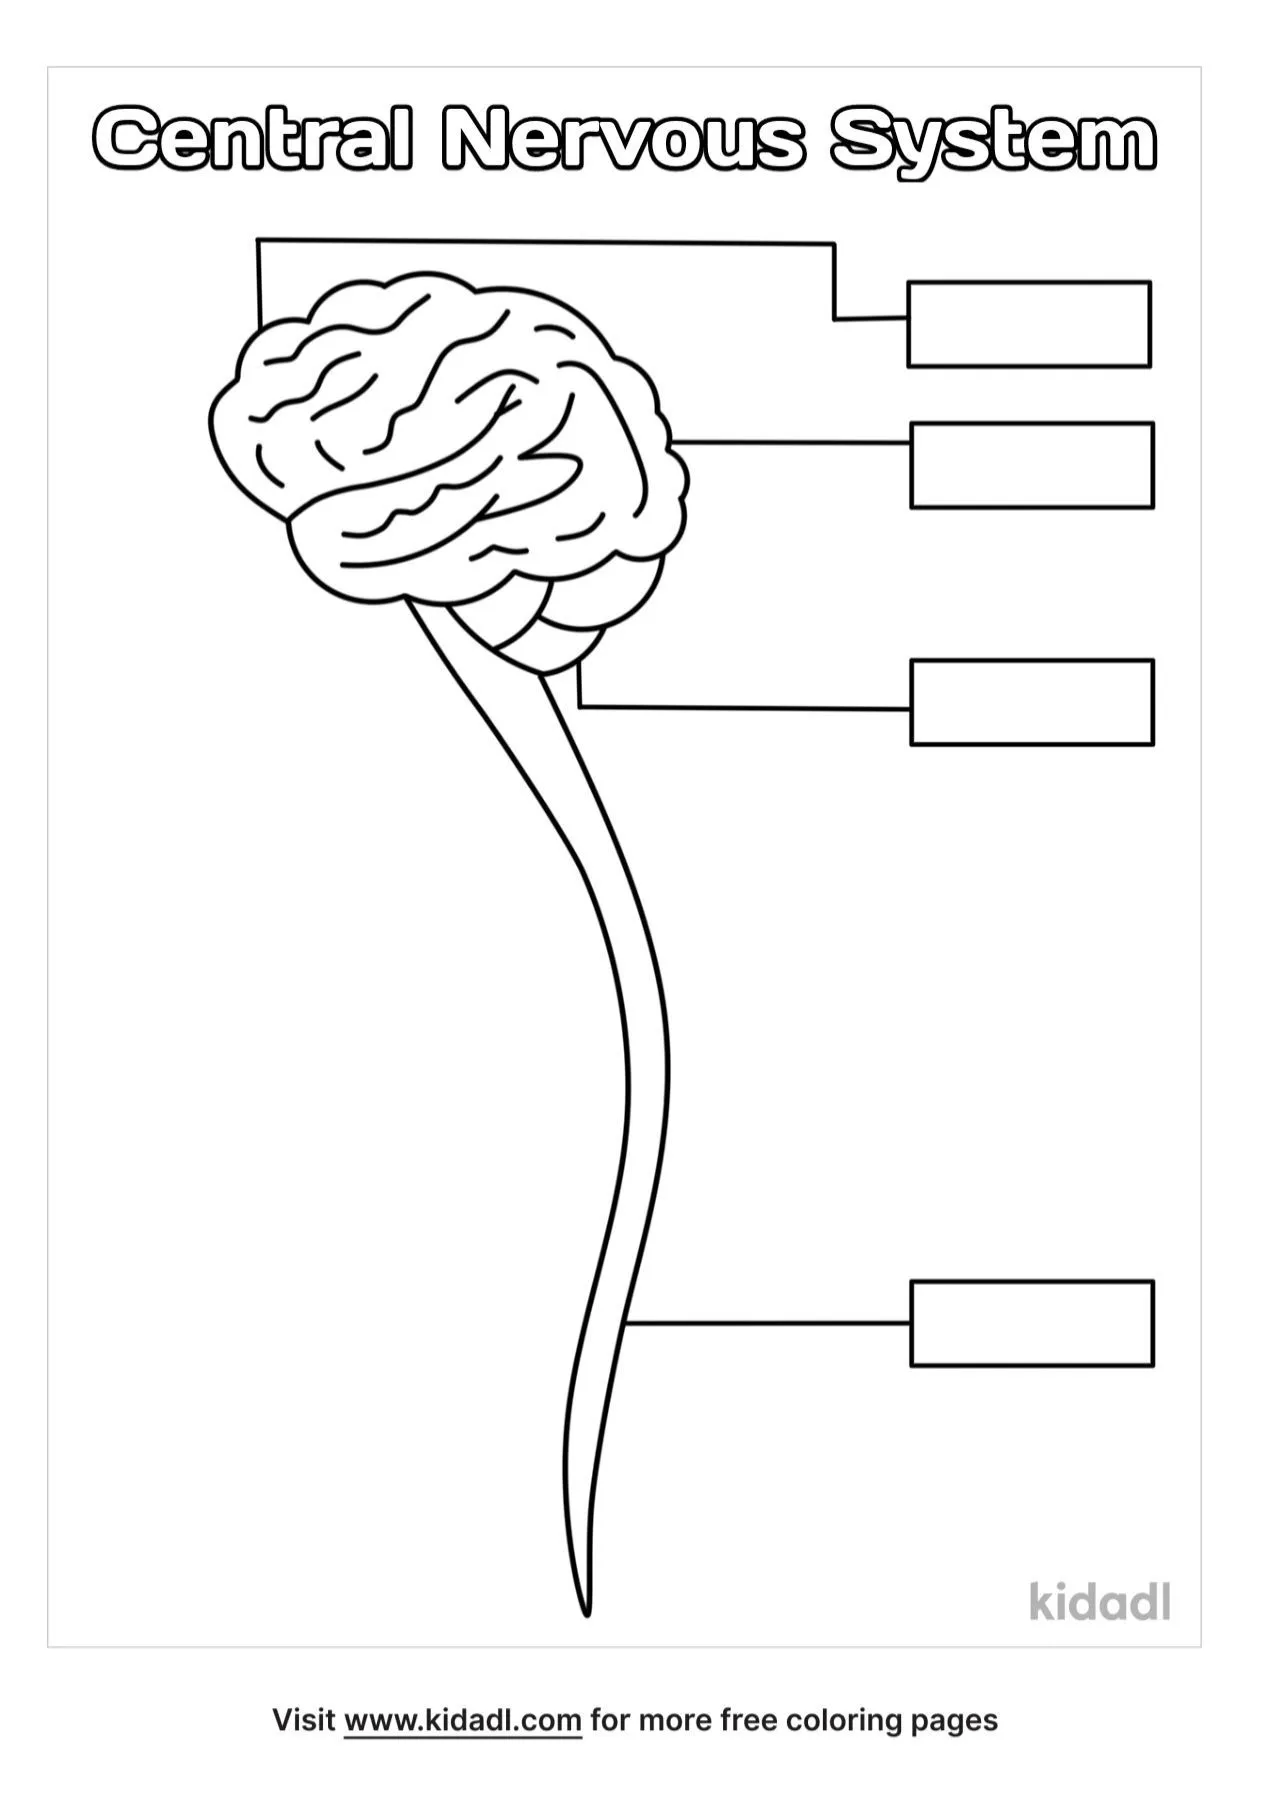 Free the central nervous system coloring page coloring page printables